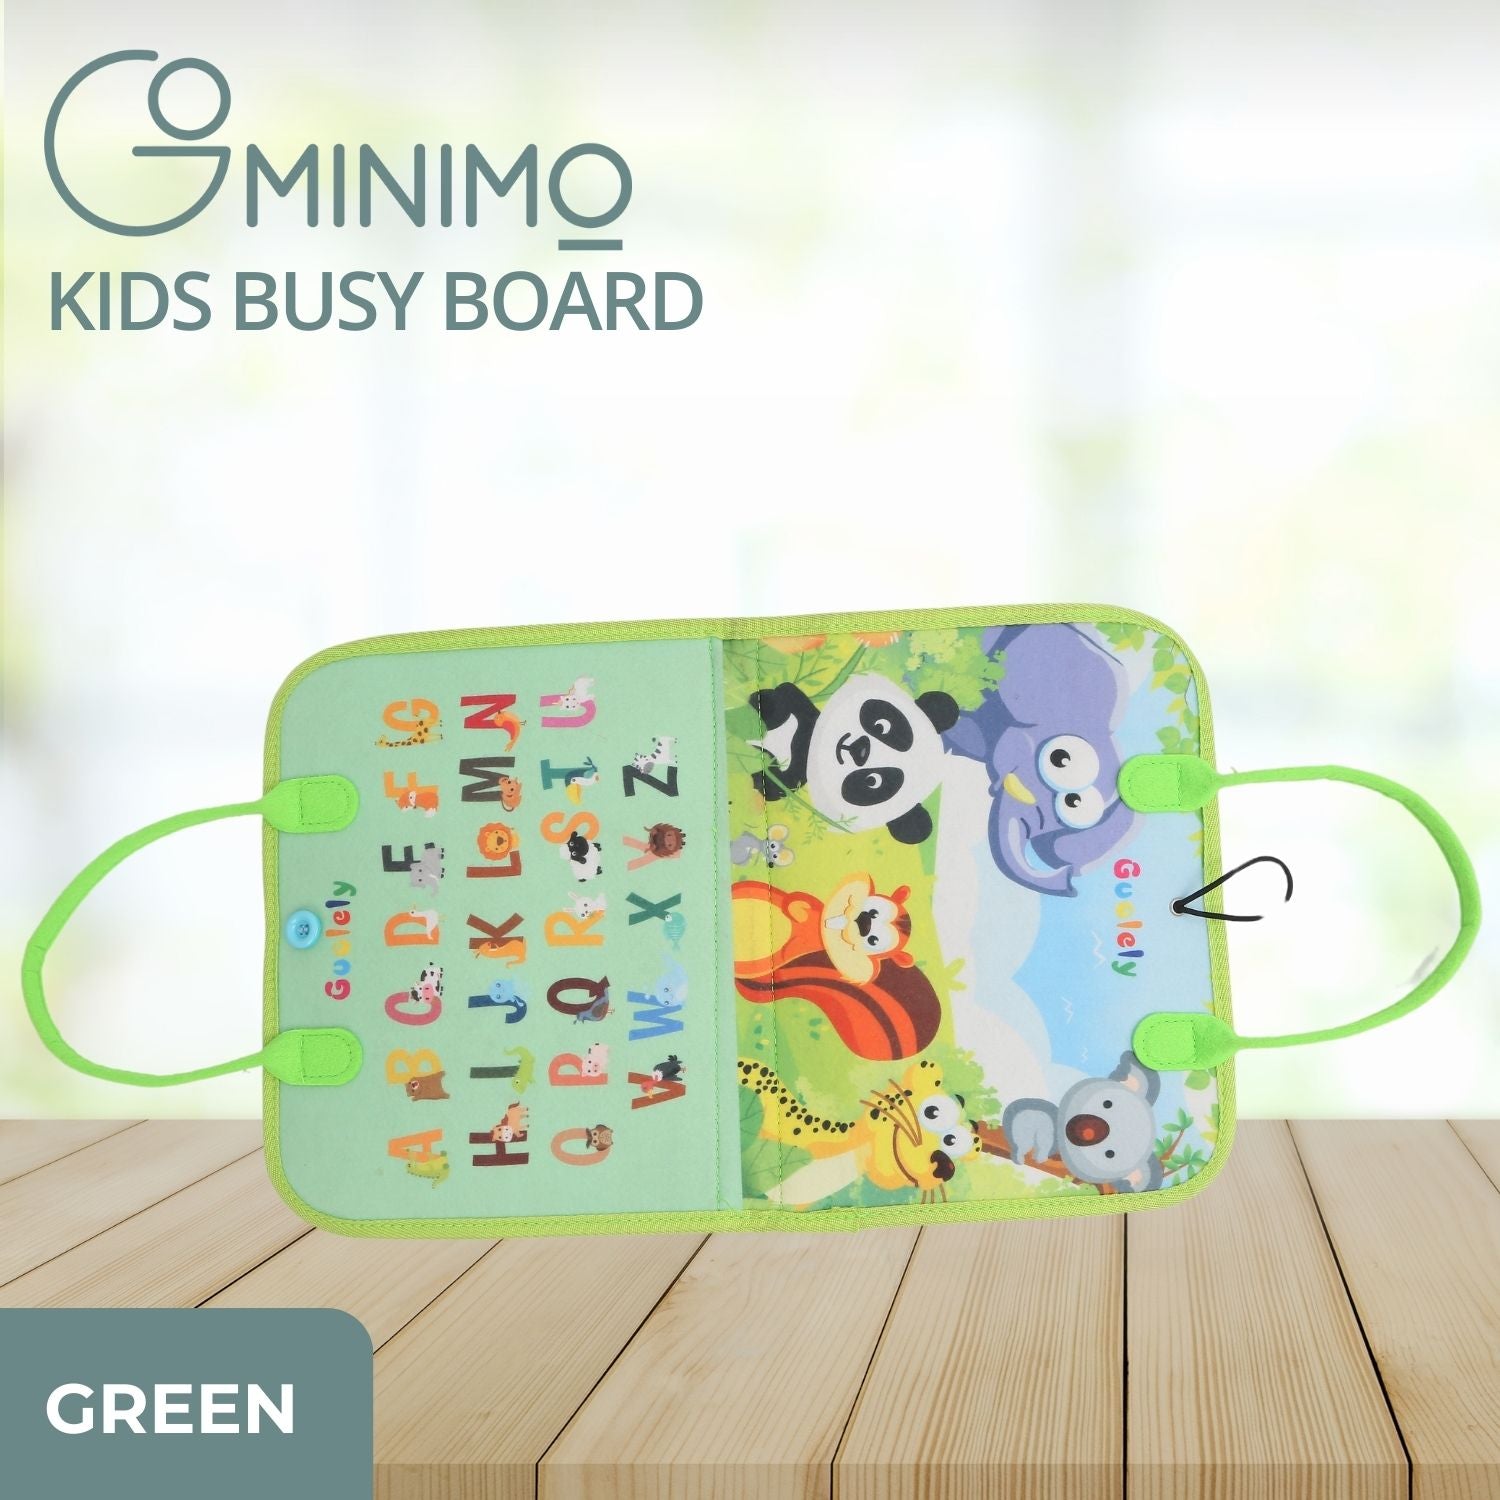 GOMINIMO Kids Busy Board Learning Toys (Green) - 0